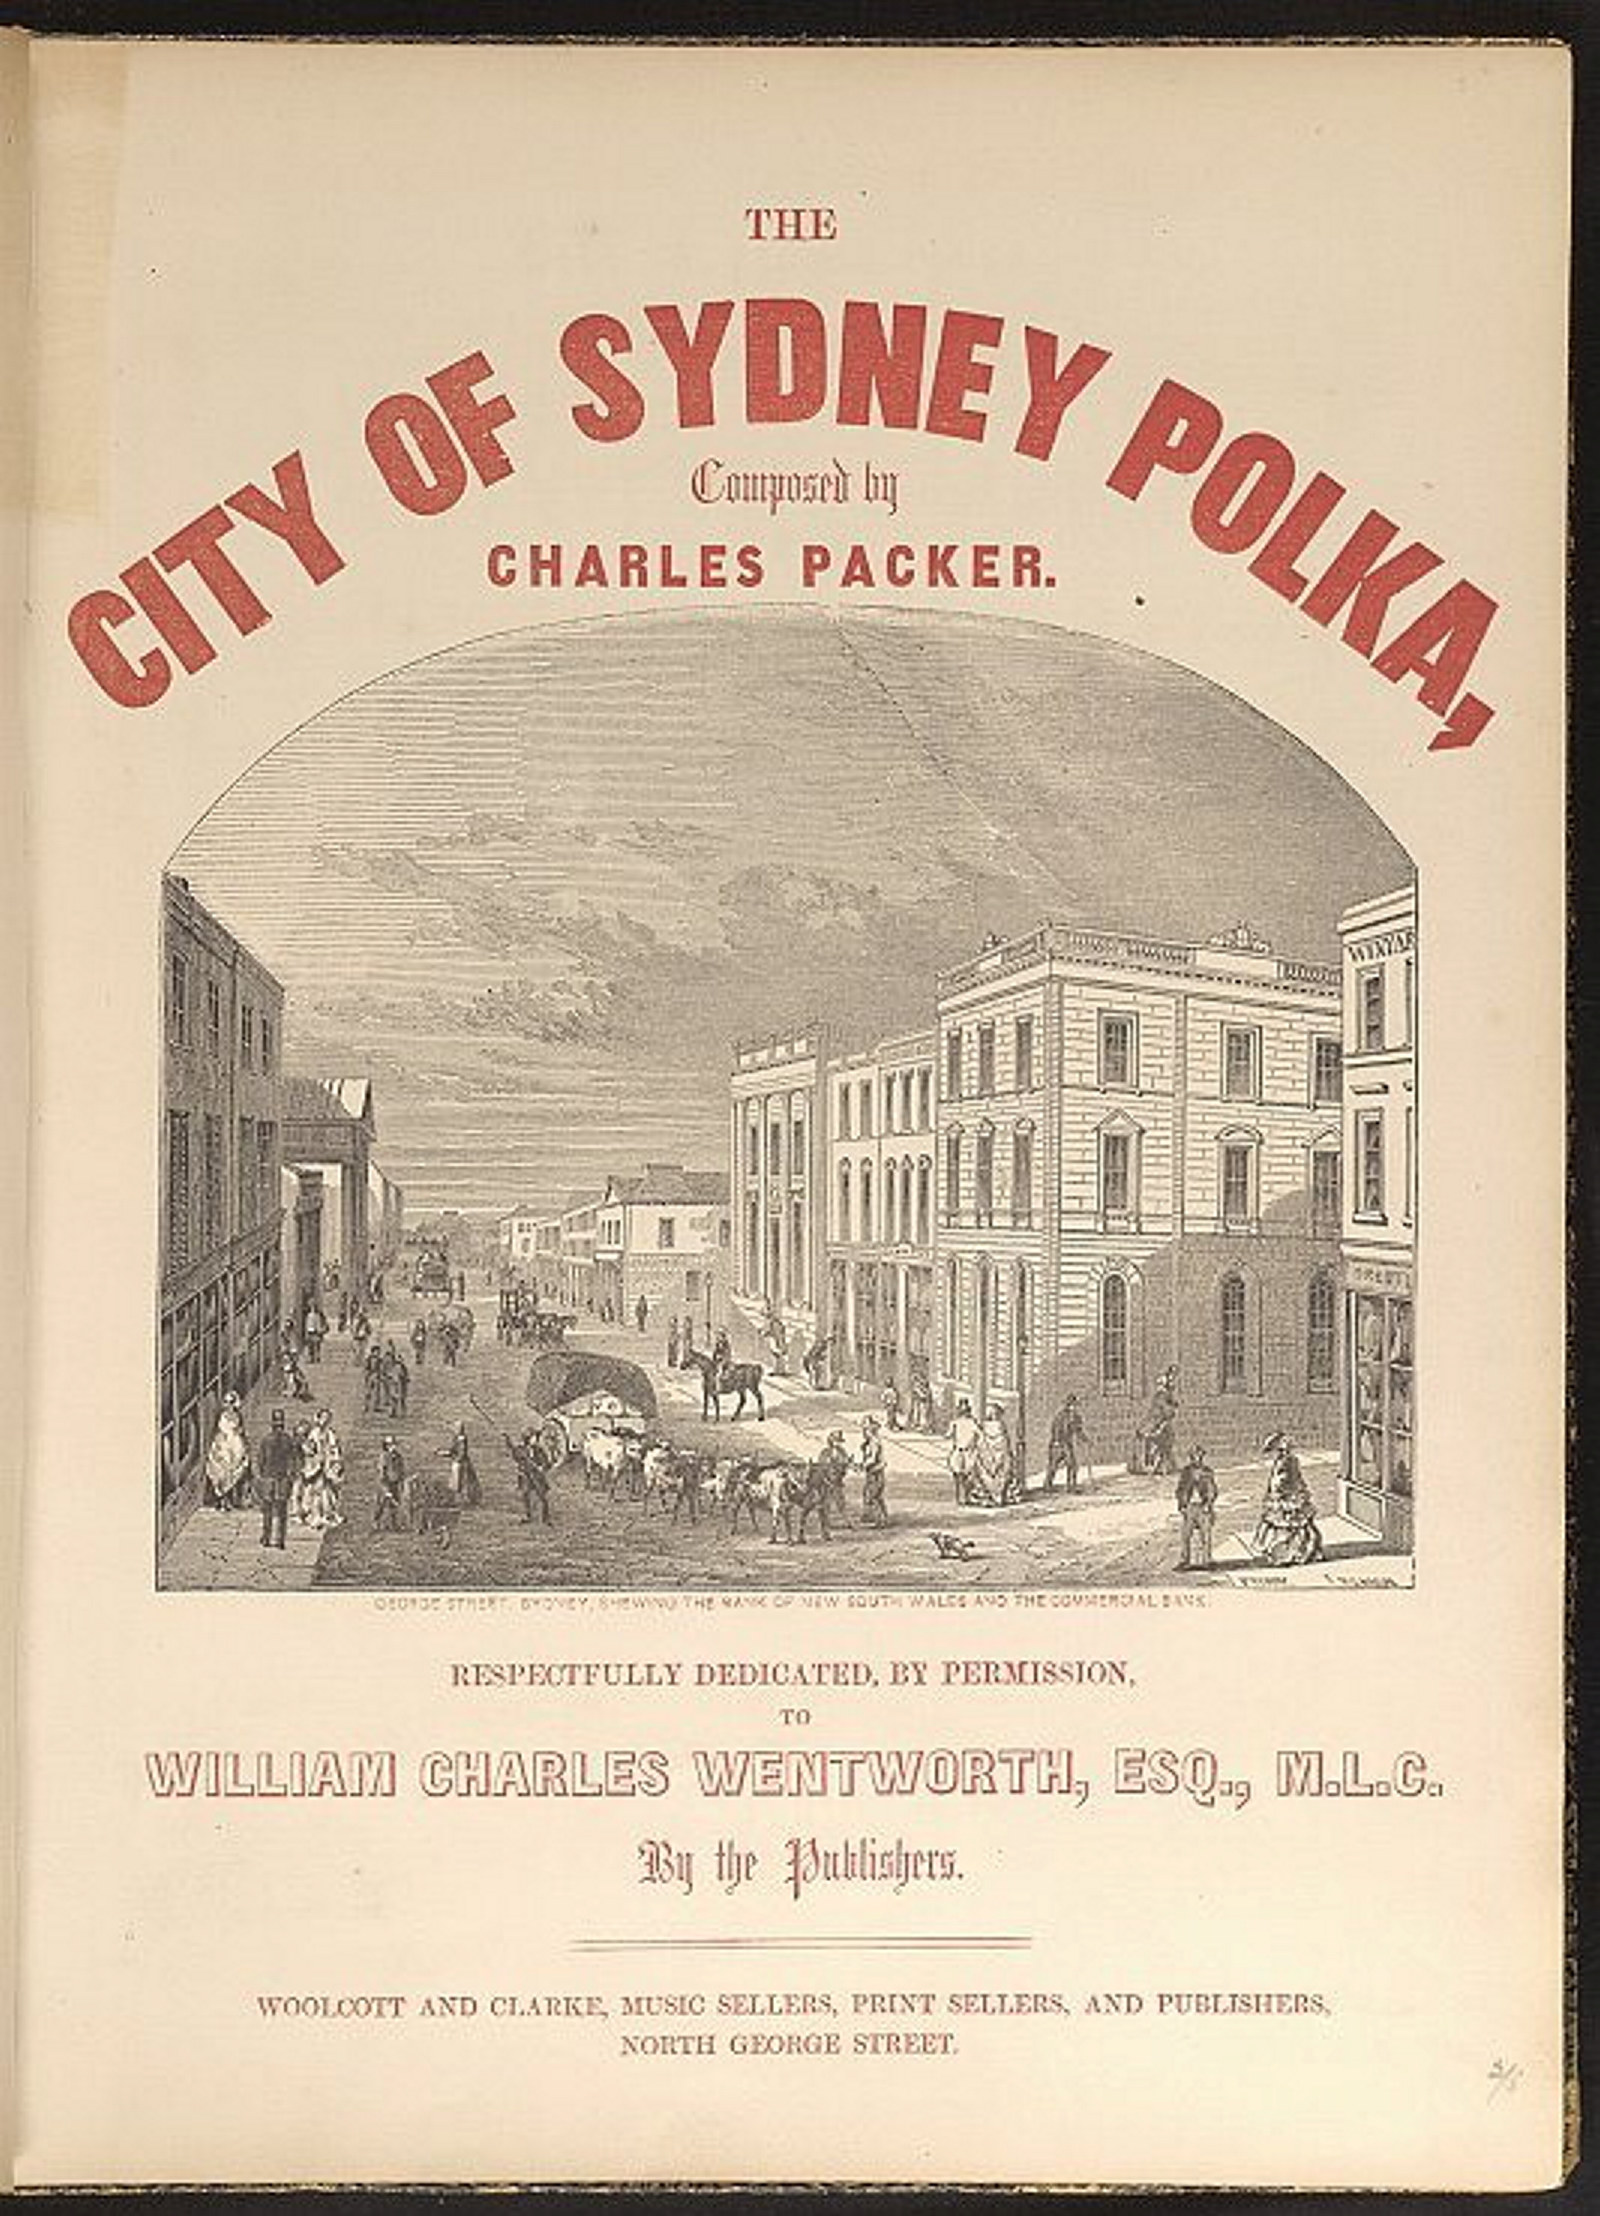 Cover of sheet music book